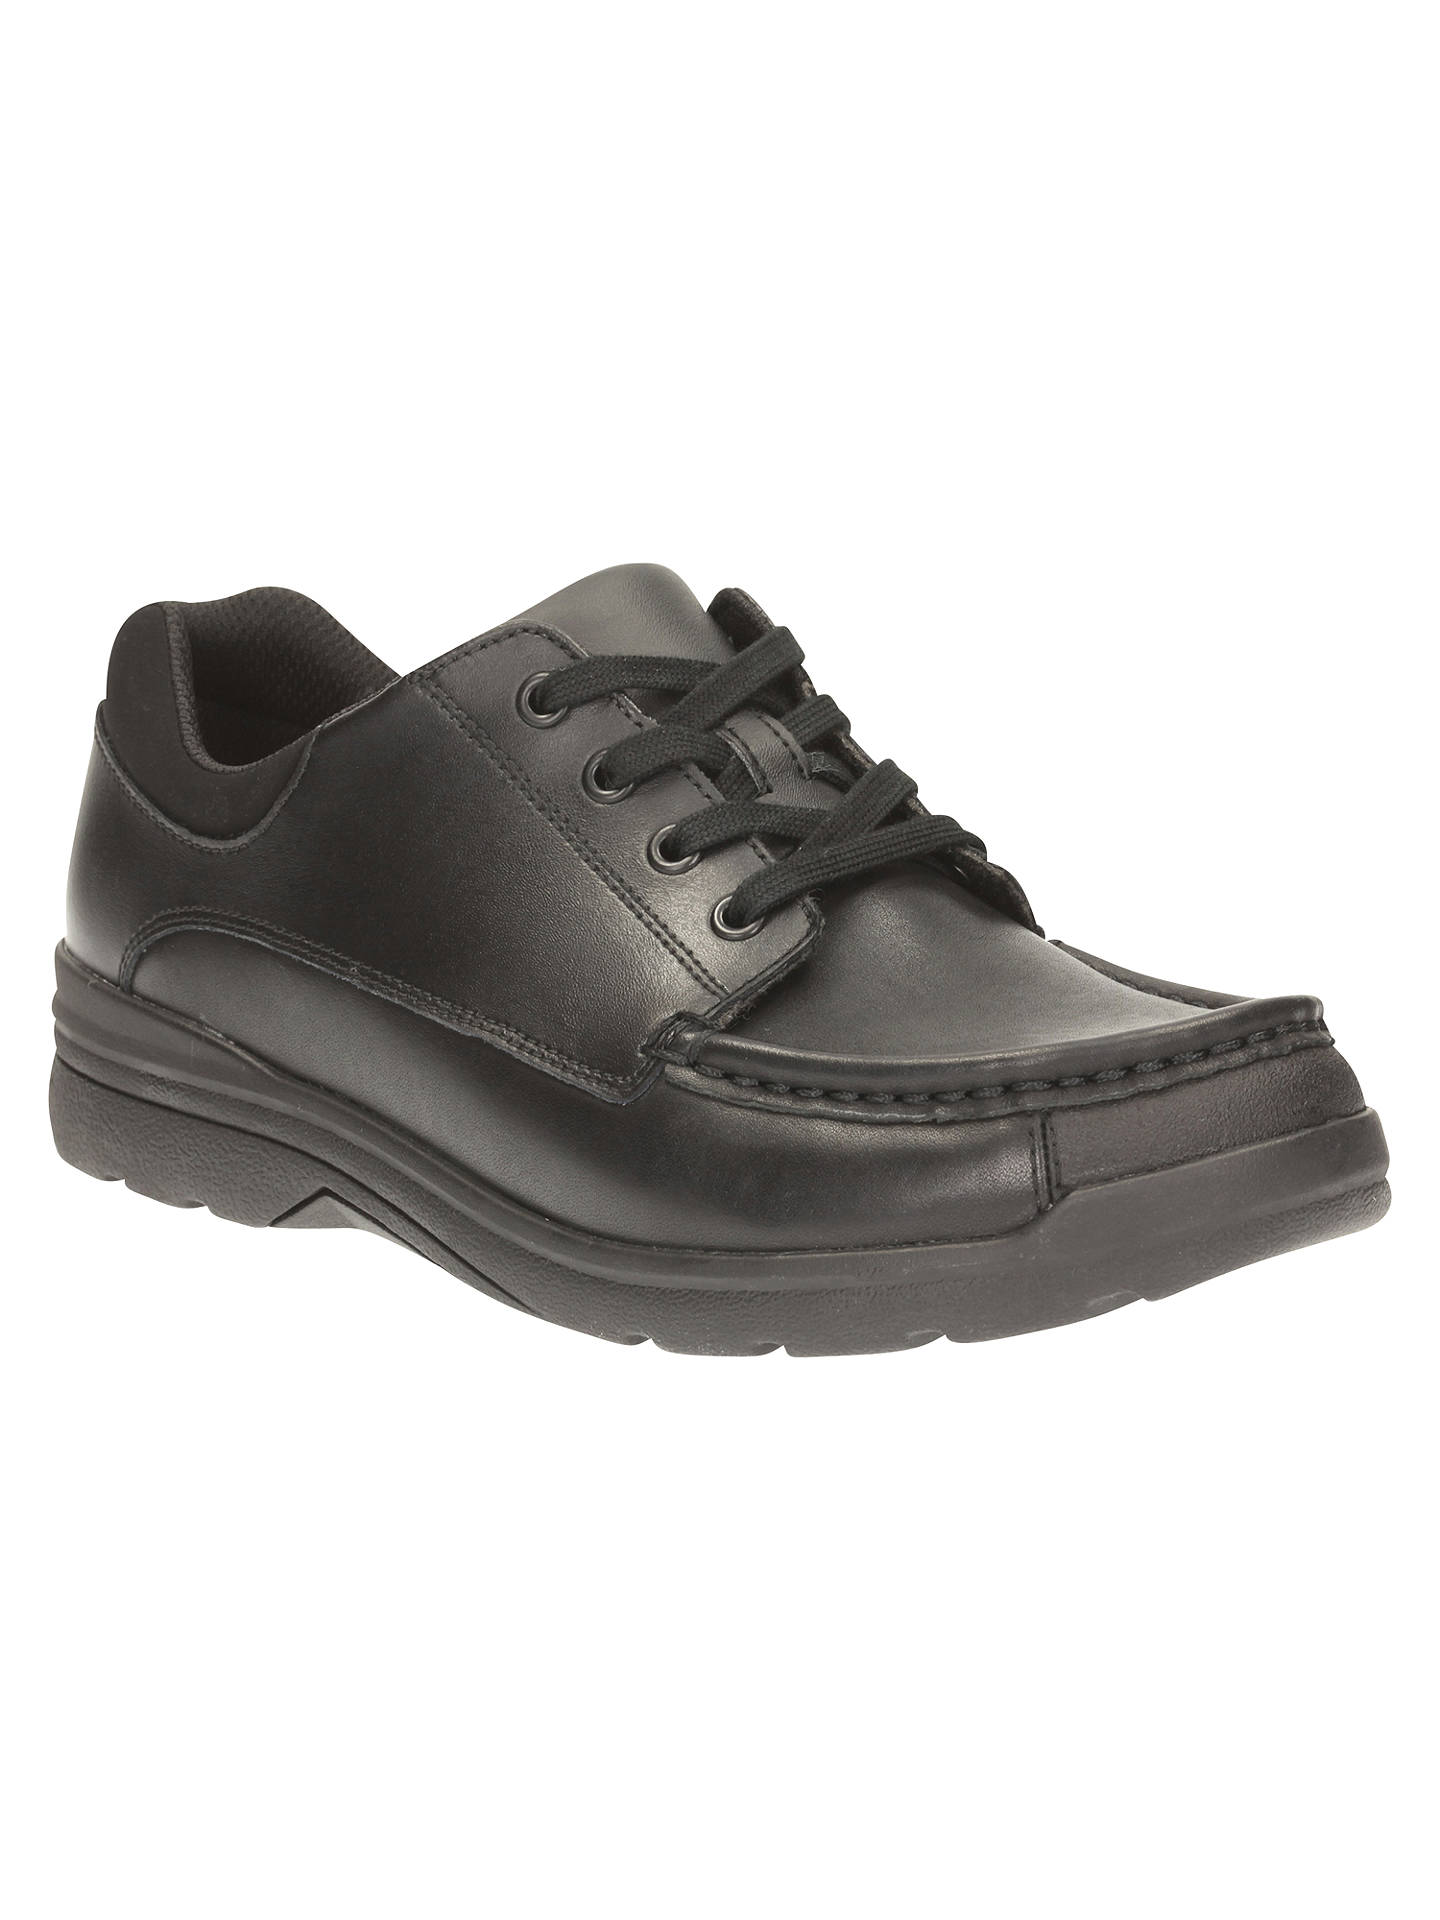 Clarks Children's Loris Step Leather Lace-Up School Shoes, Black at ...